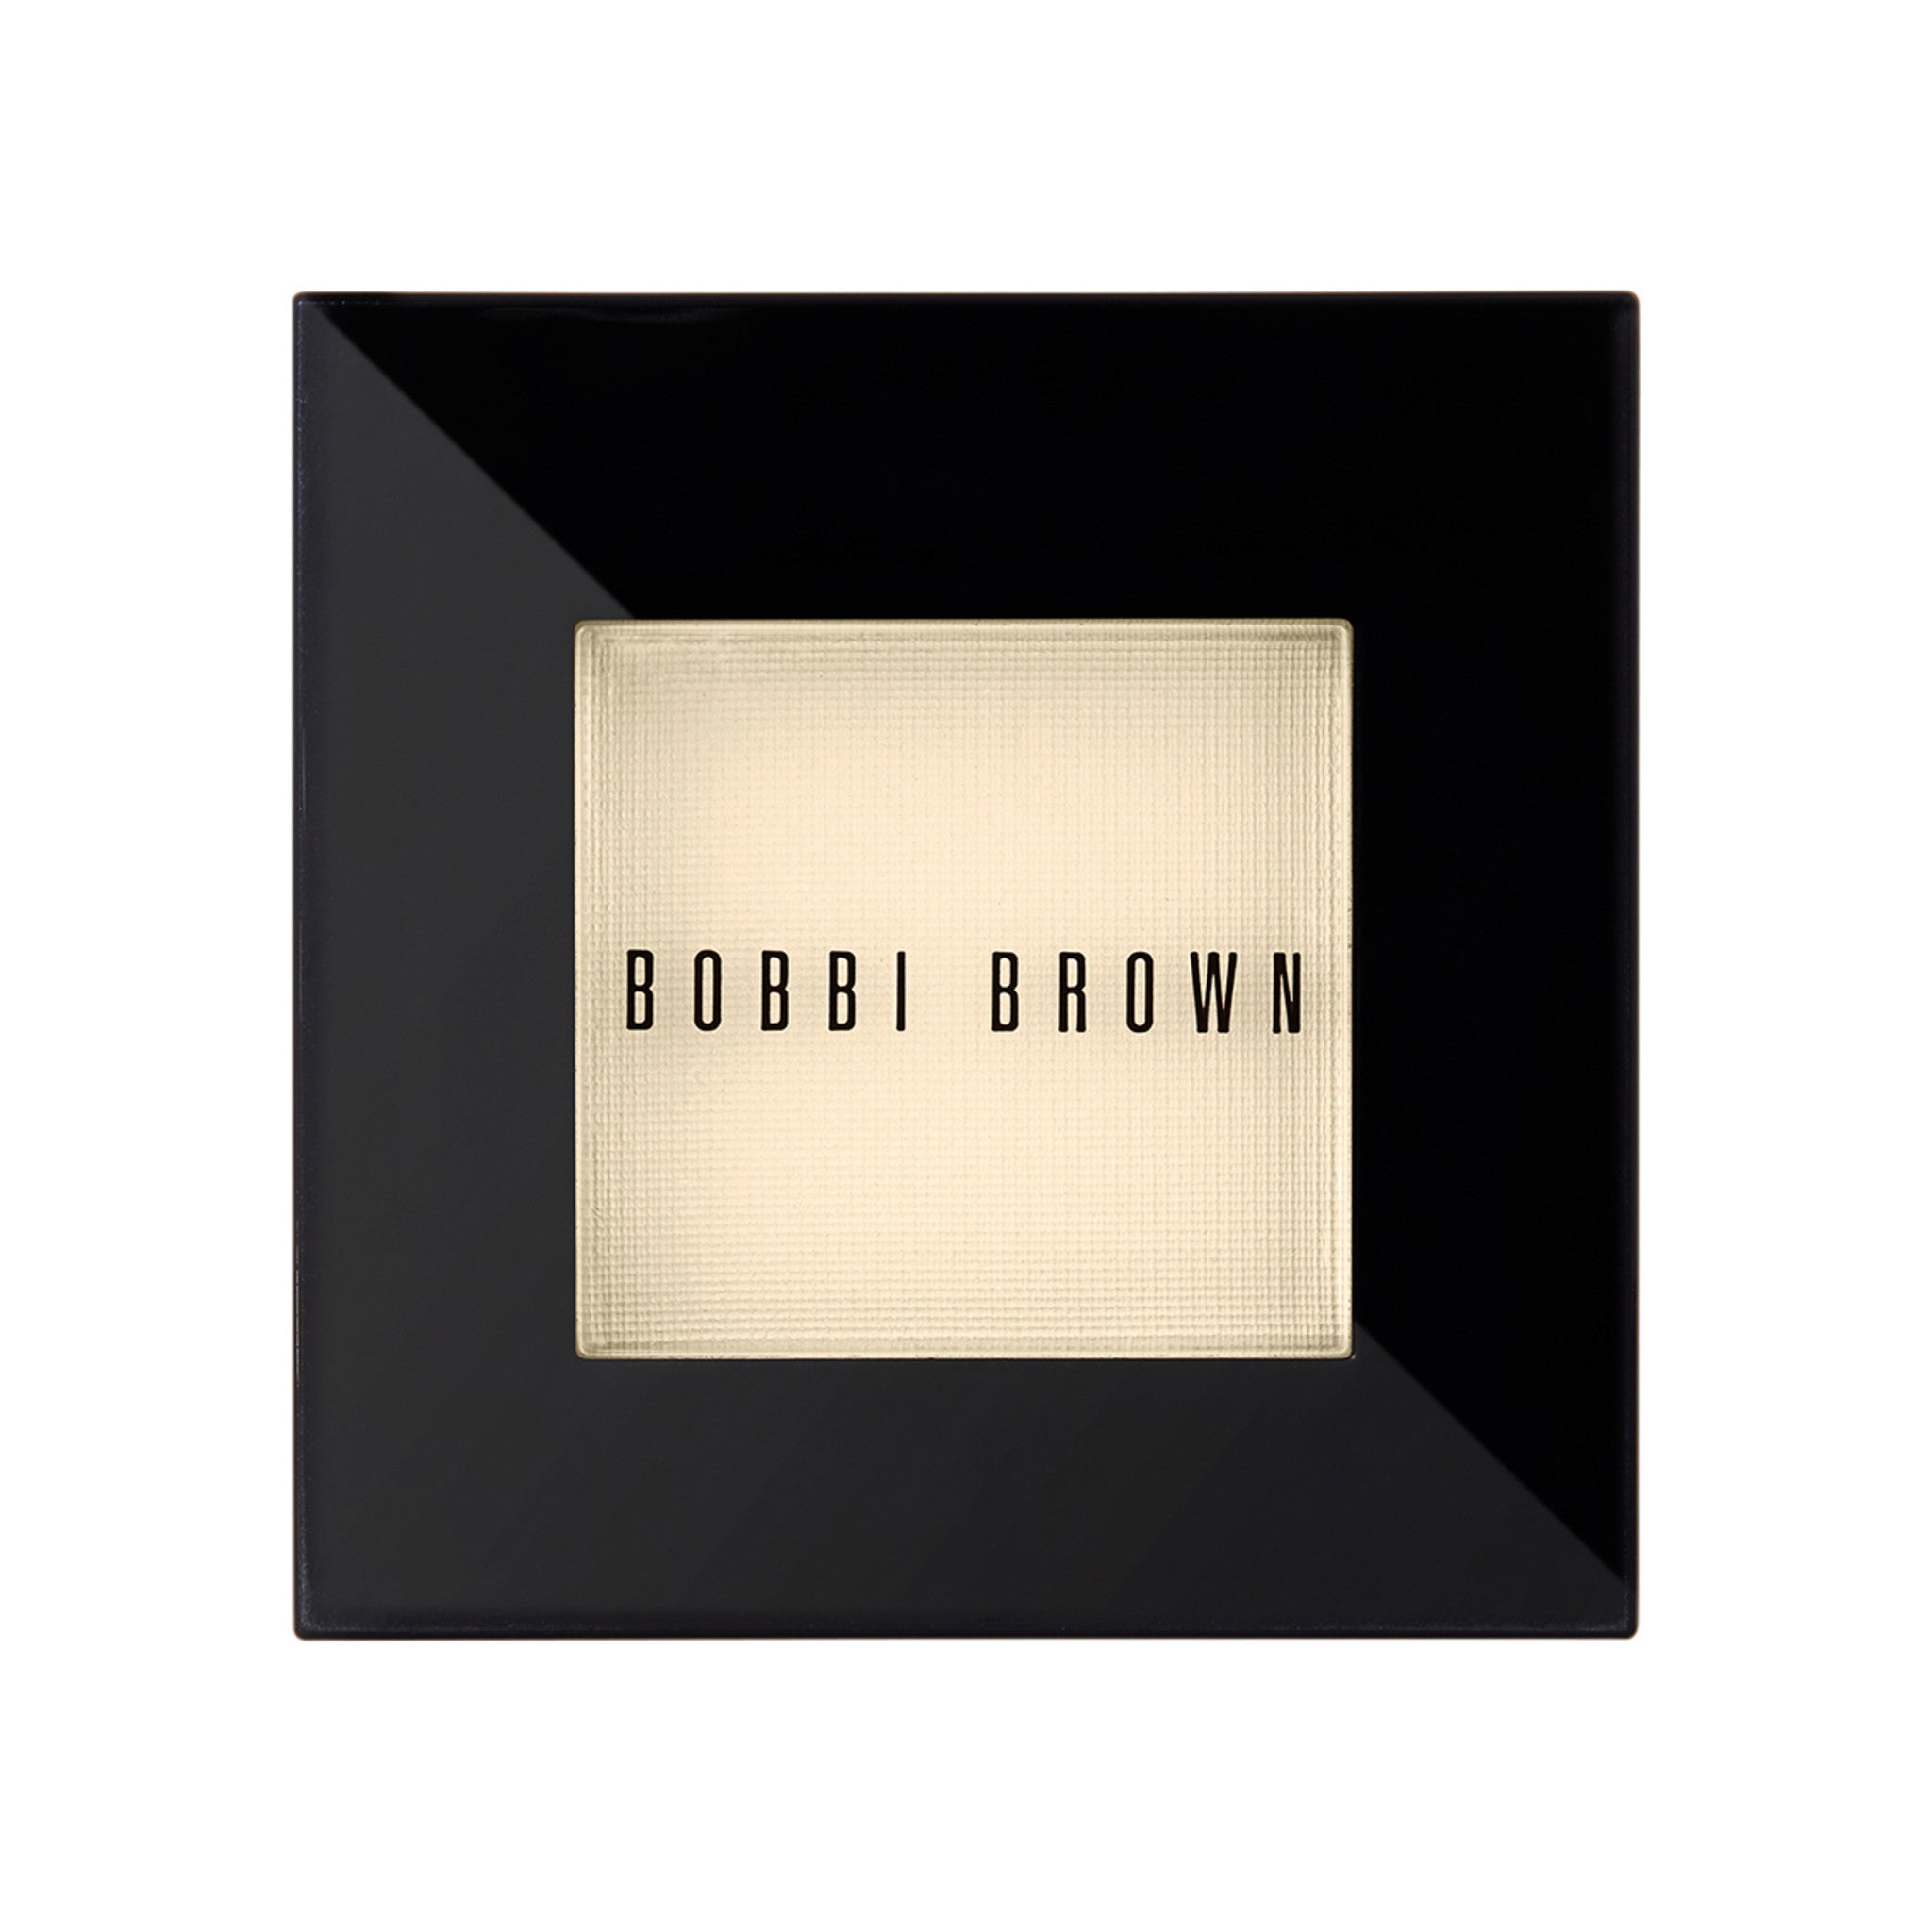 Bobbi Brown Eye Shadow Color/Shade variant: Ivory main image. This product is in the color white